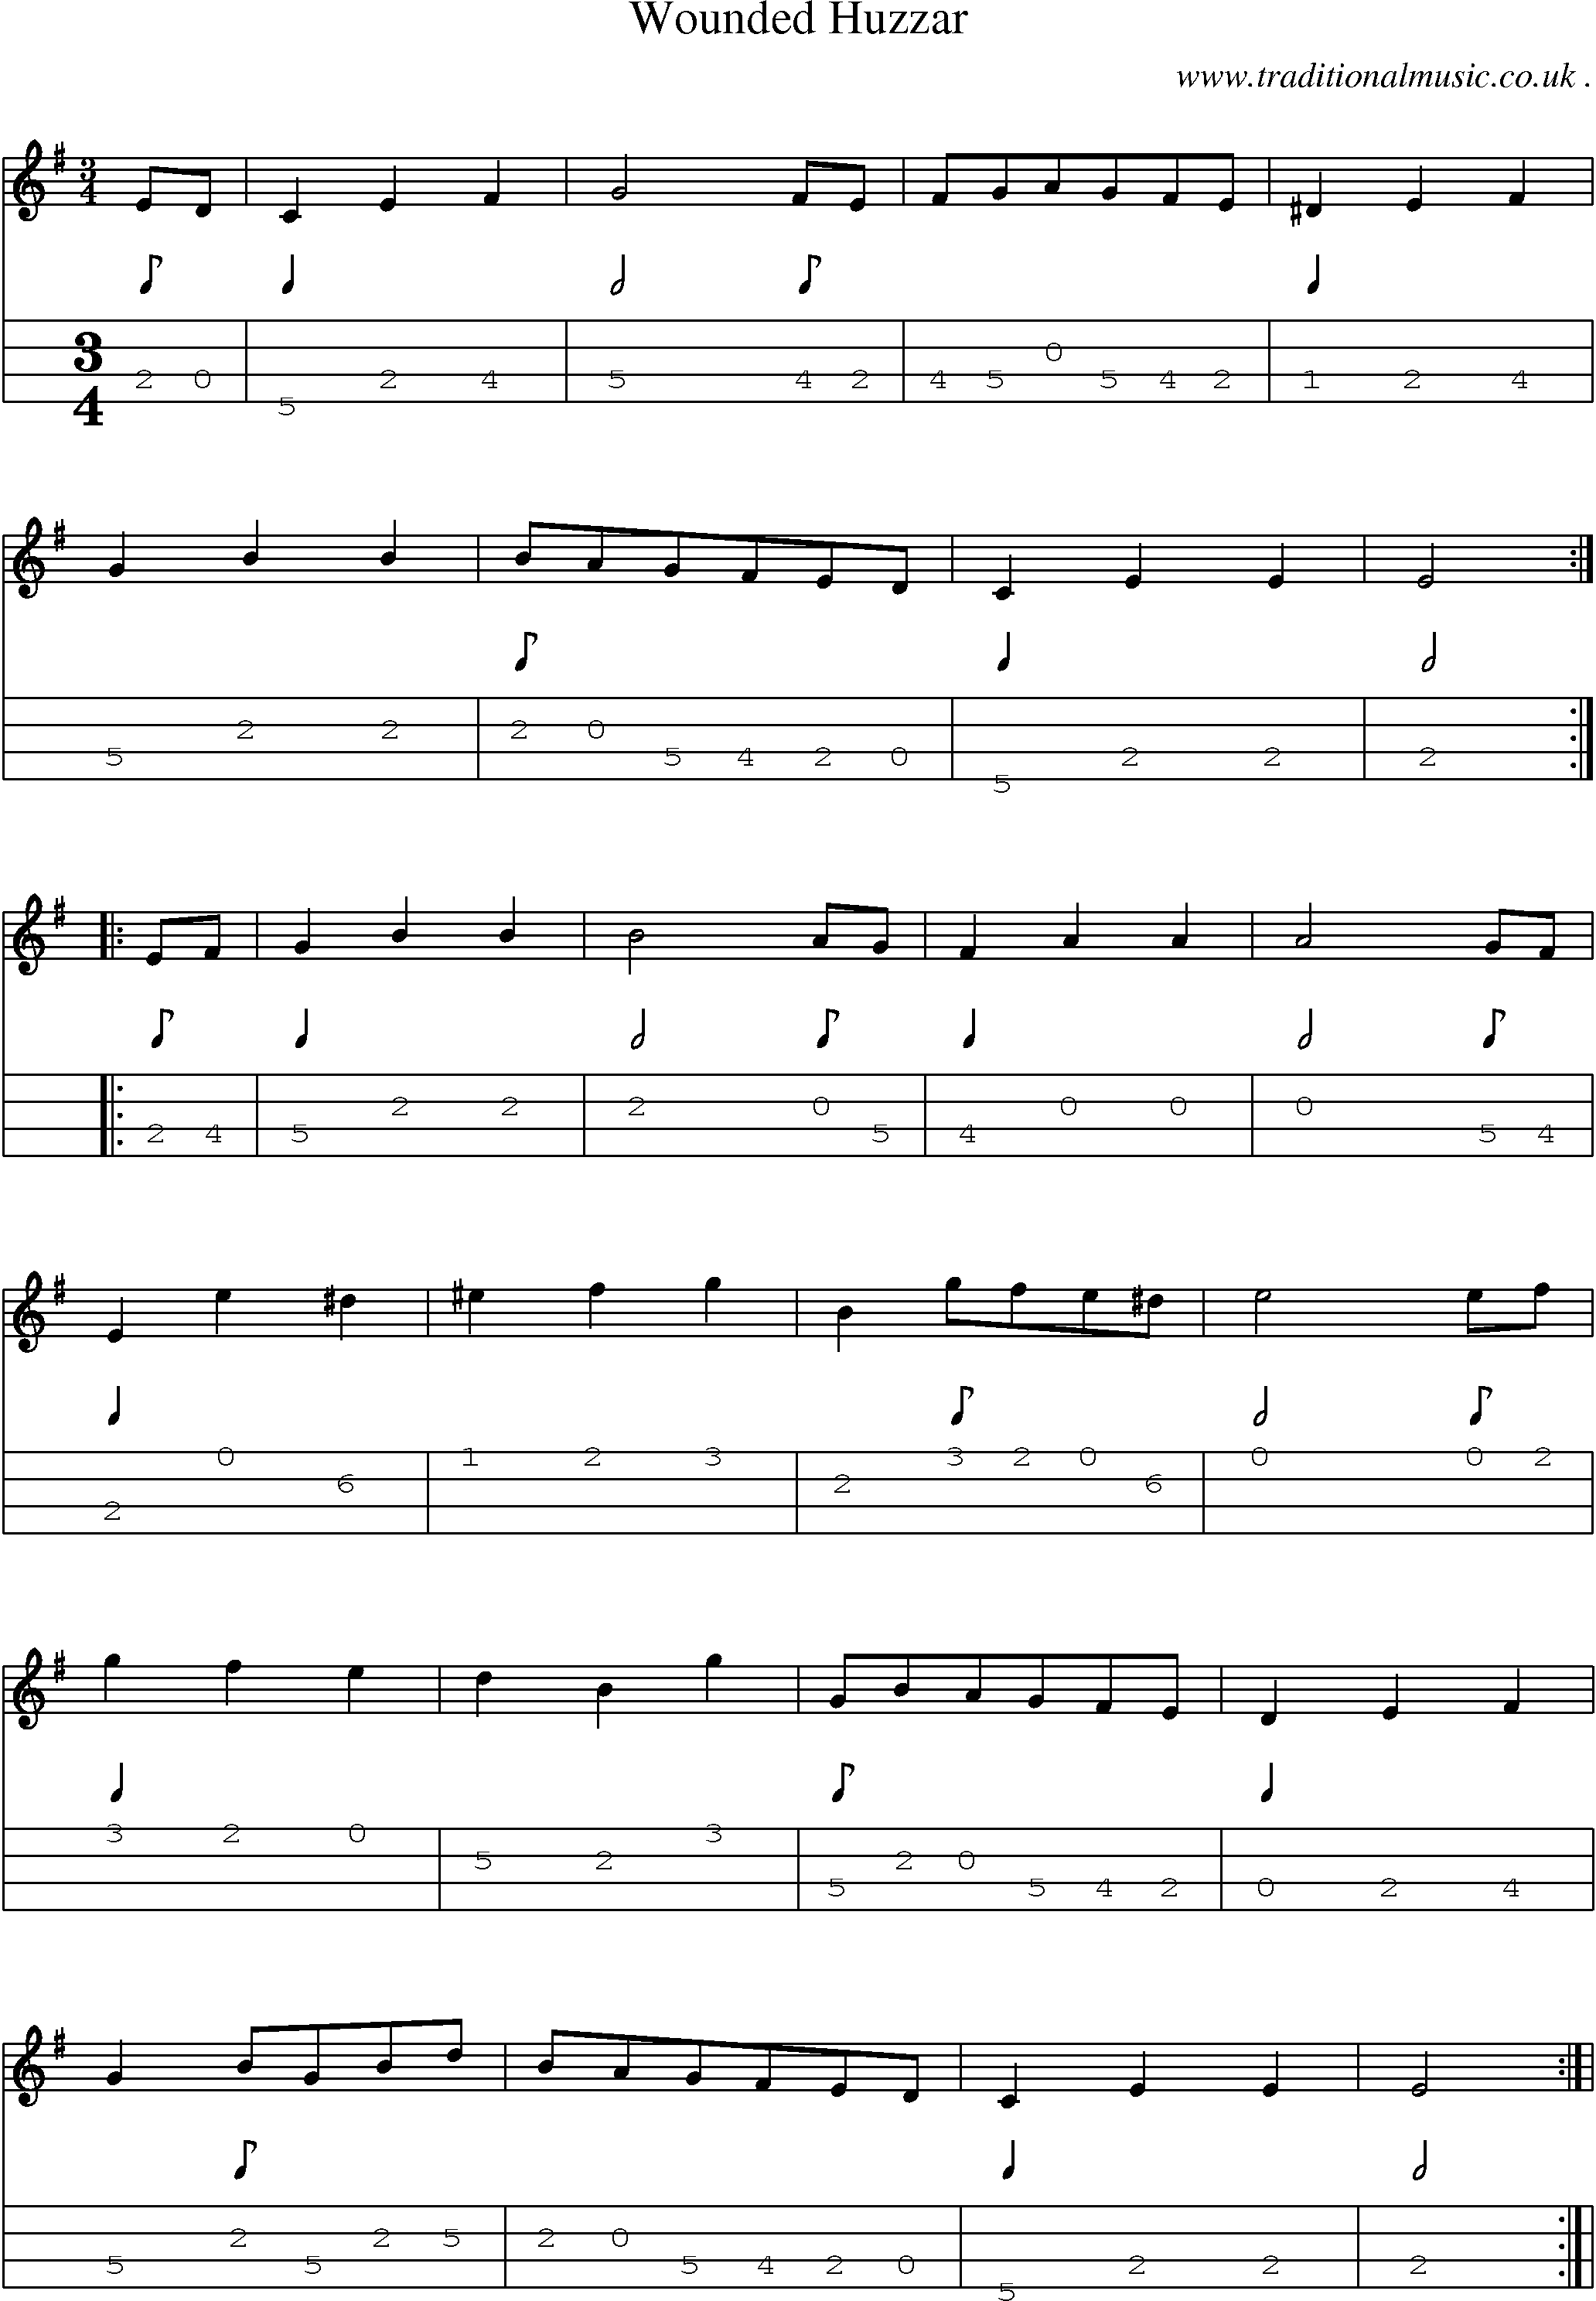 Sheet-Music and Mandolin Tabs for Wounded Huzzar